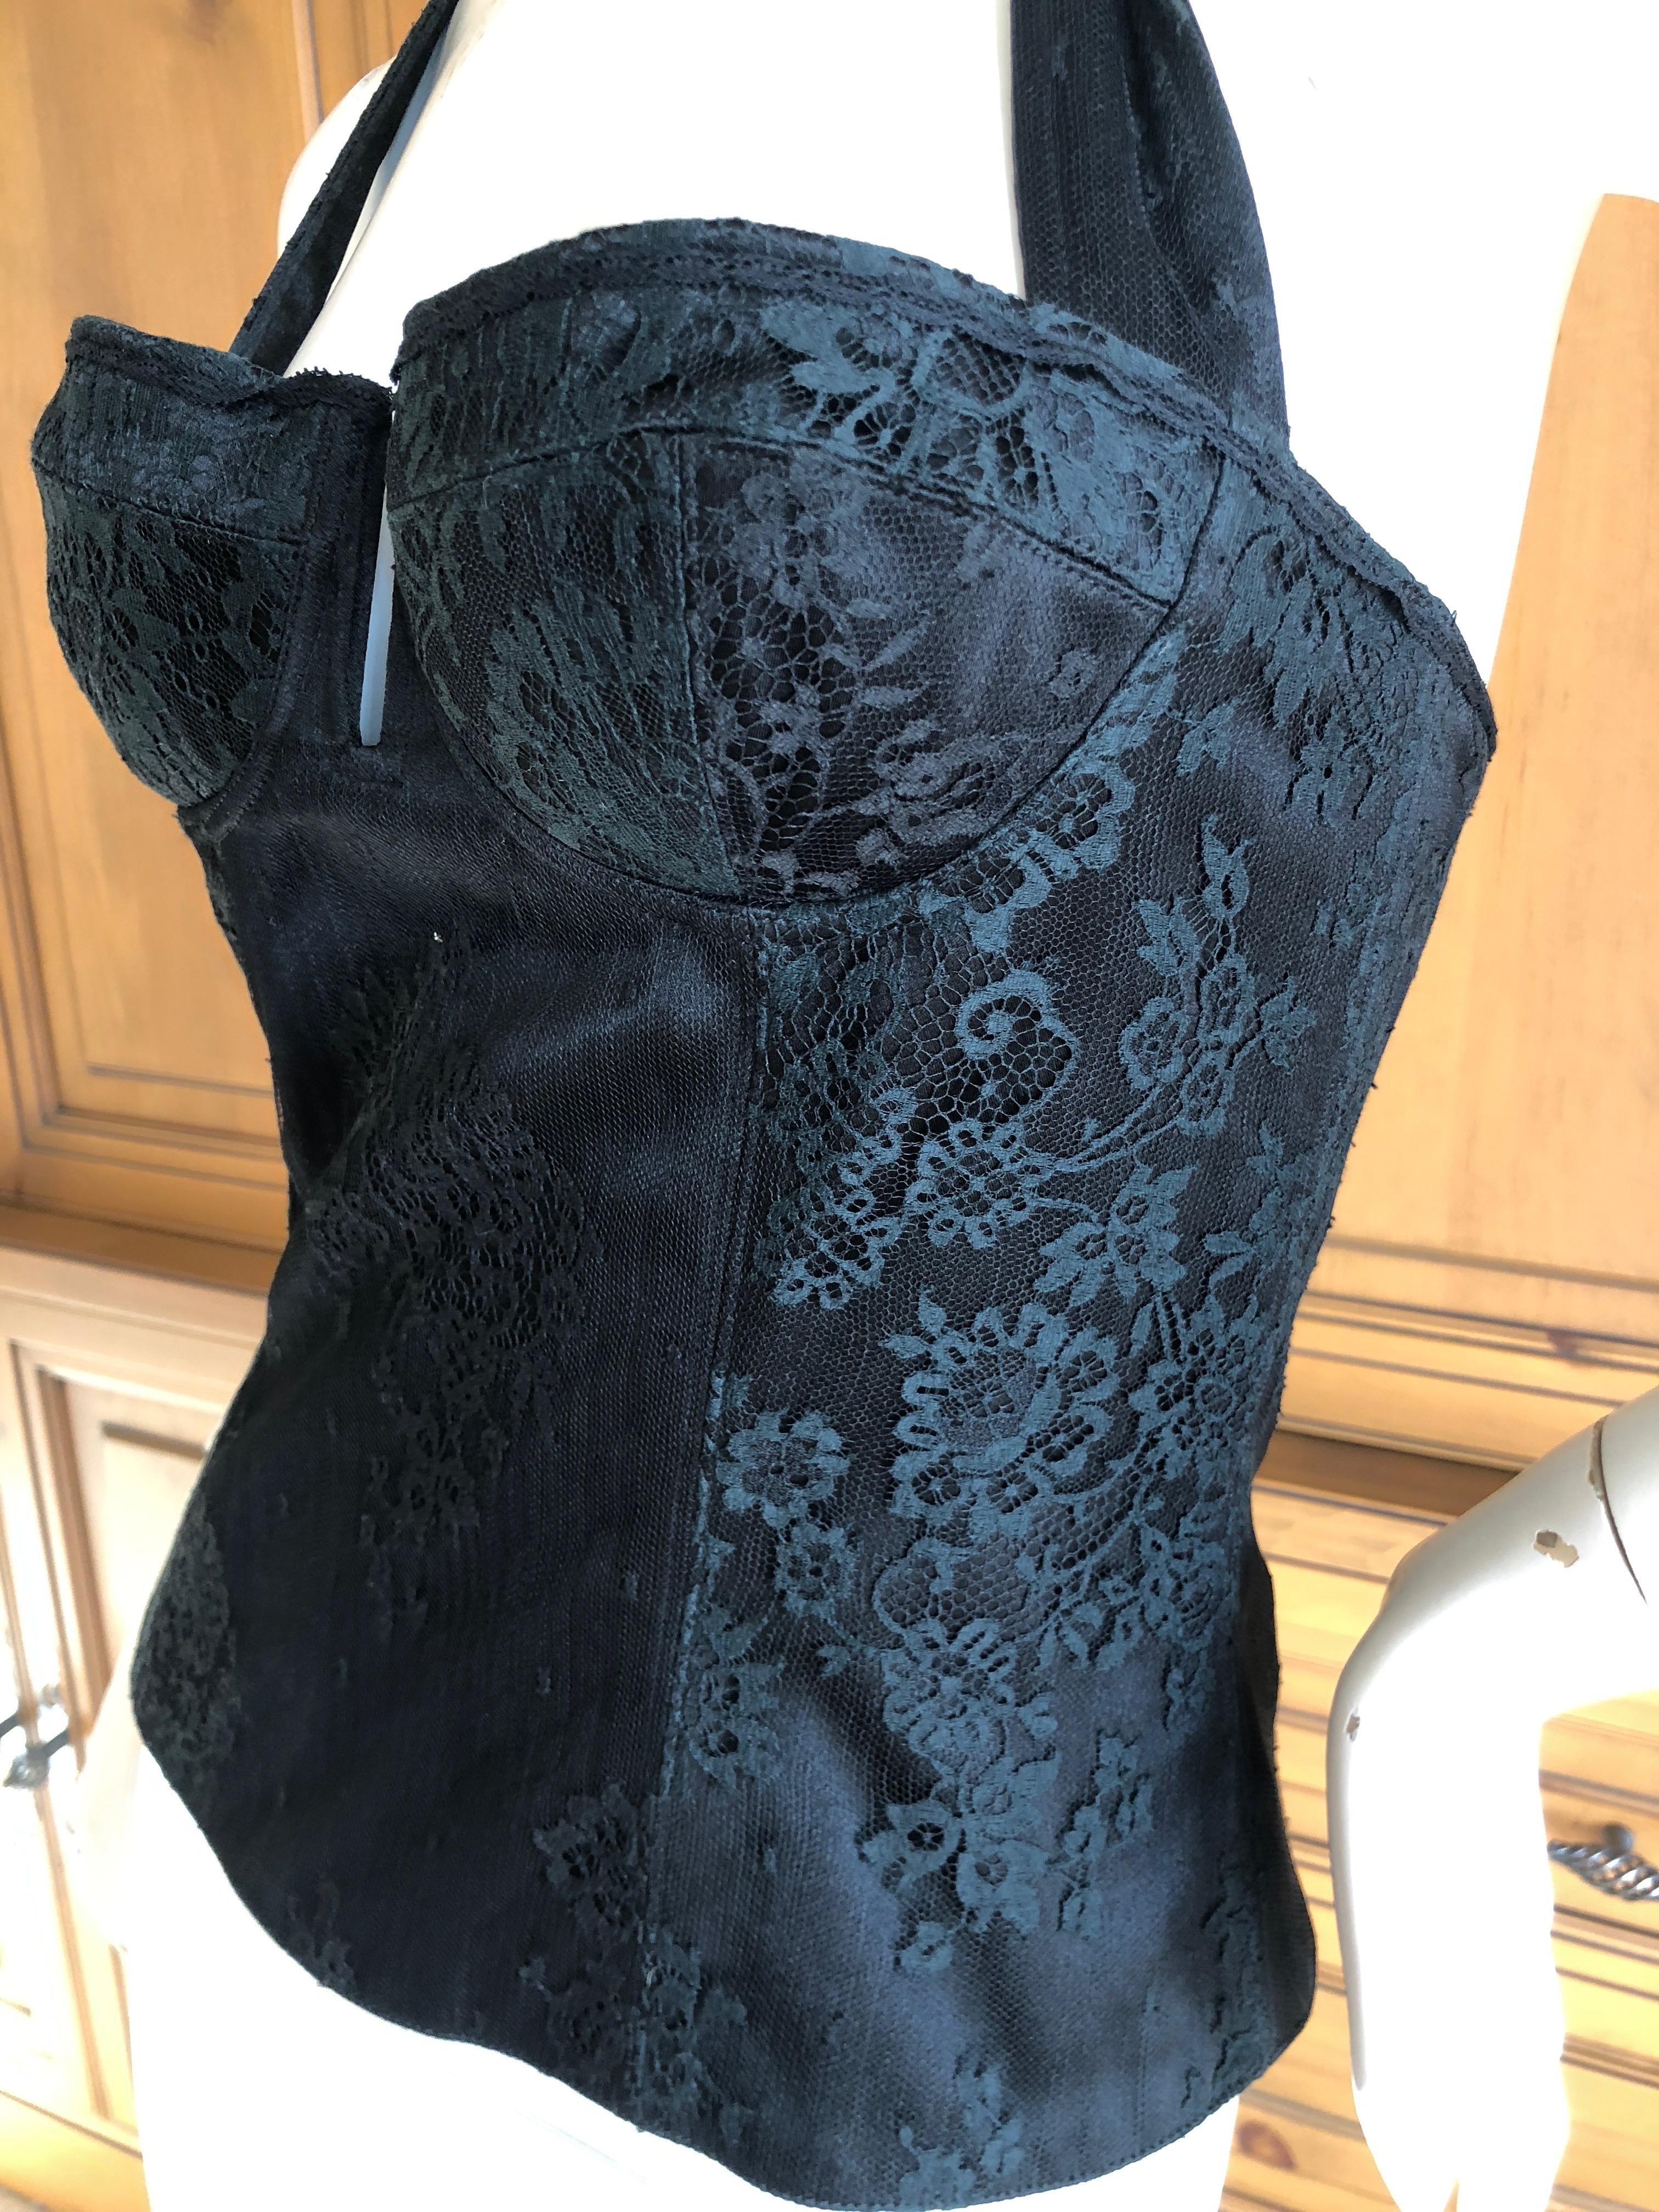 Christian Dior by John Galliano Vintage Black Lace Corset NWT Size 38 For Sale 2